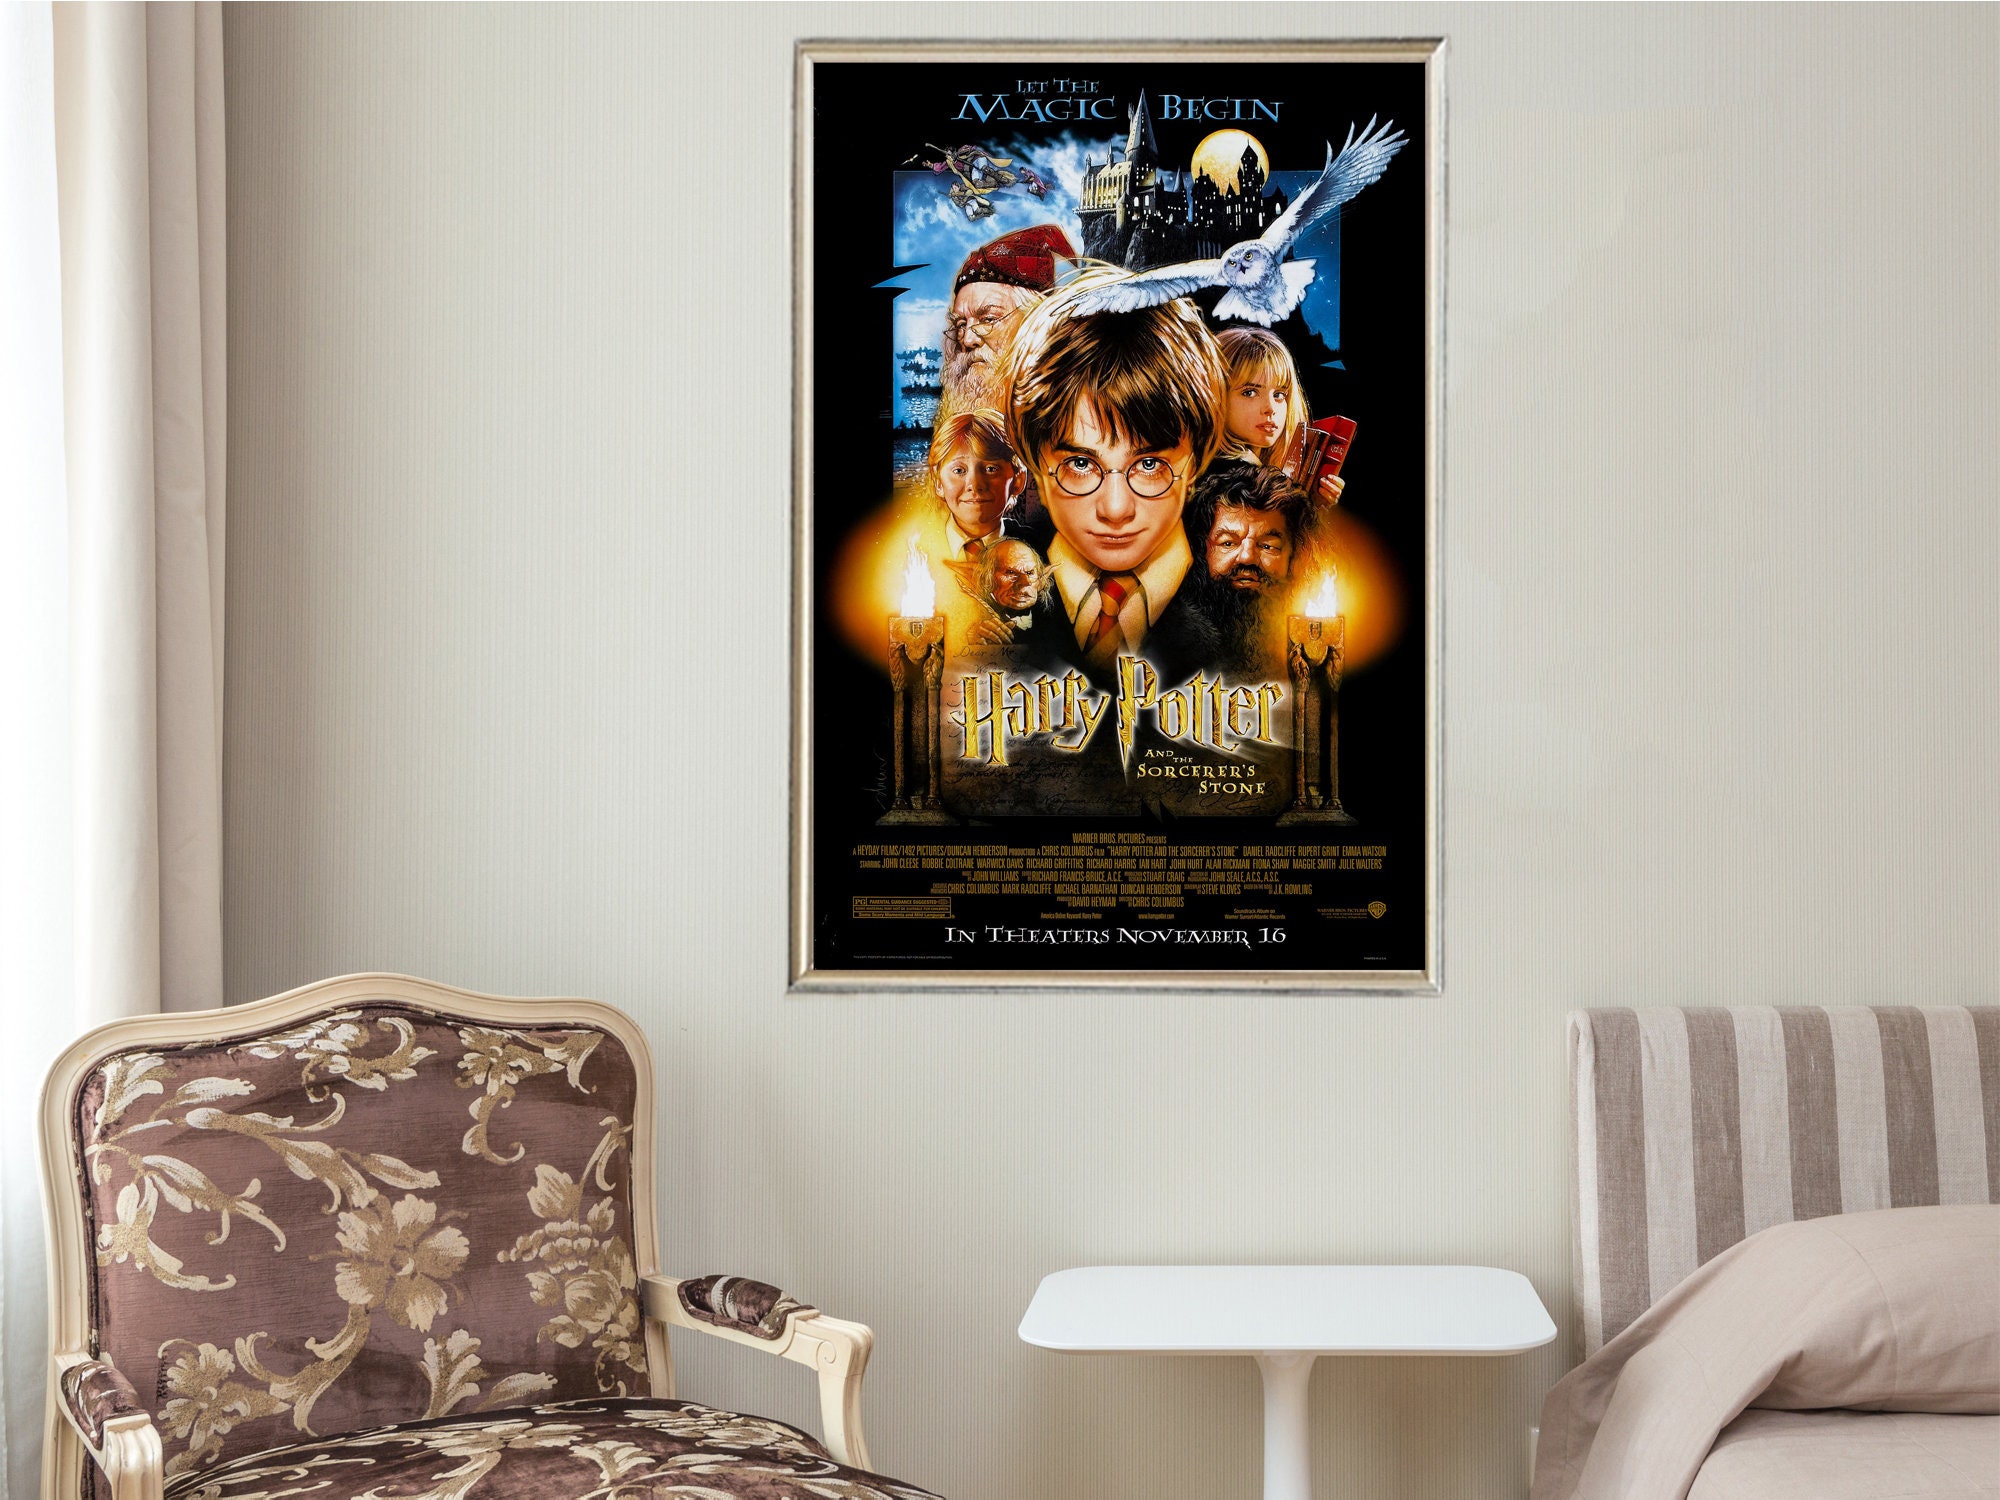 Harry Potter and the Prisoner of Azkaban - Movie Poster / Print (Regular  Style) (Size: 24 inches x 36 inches)